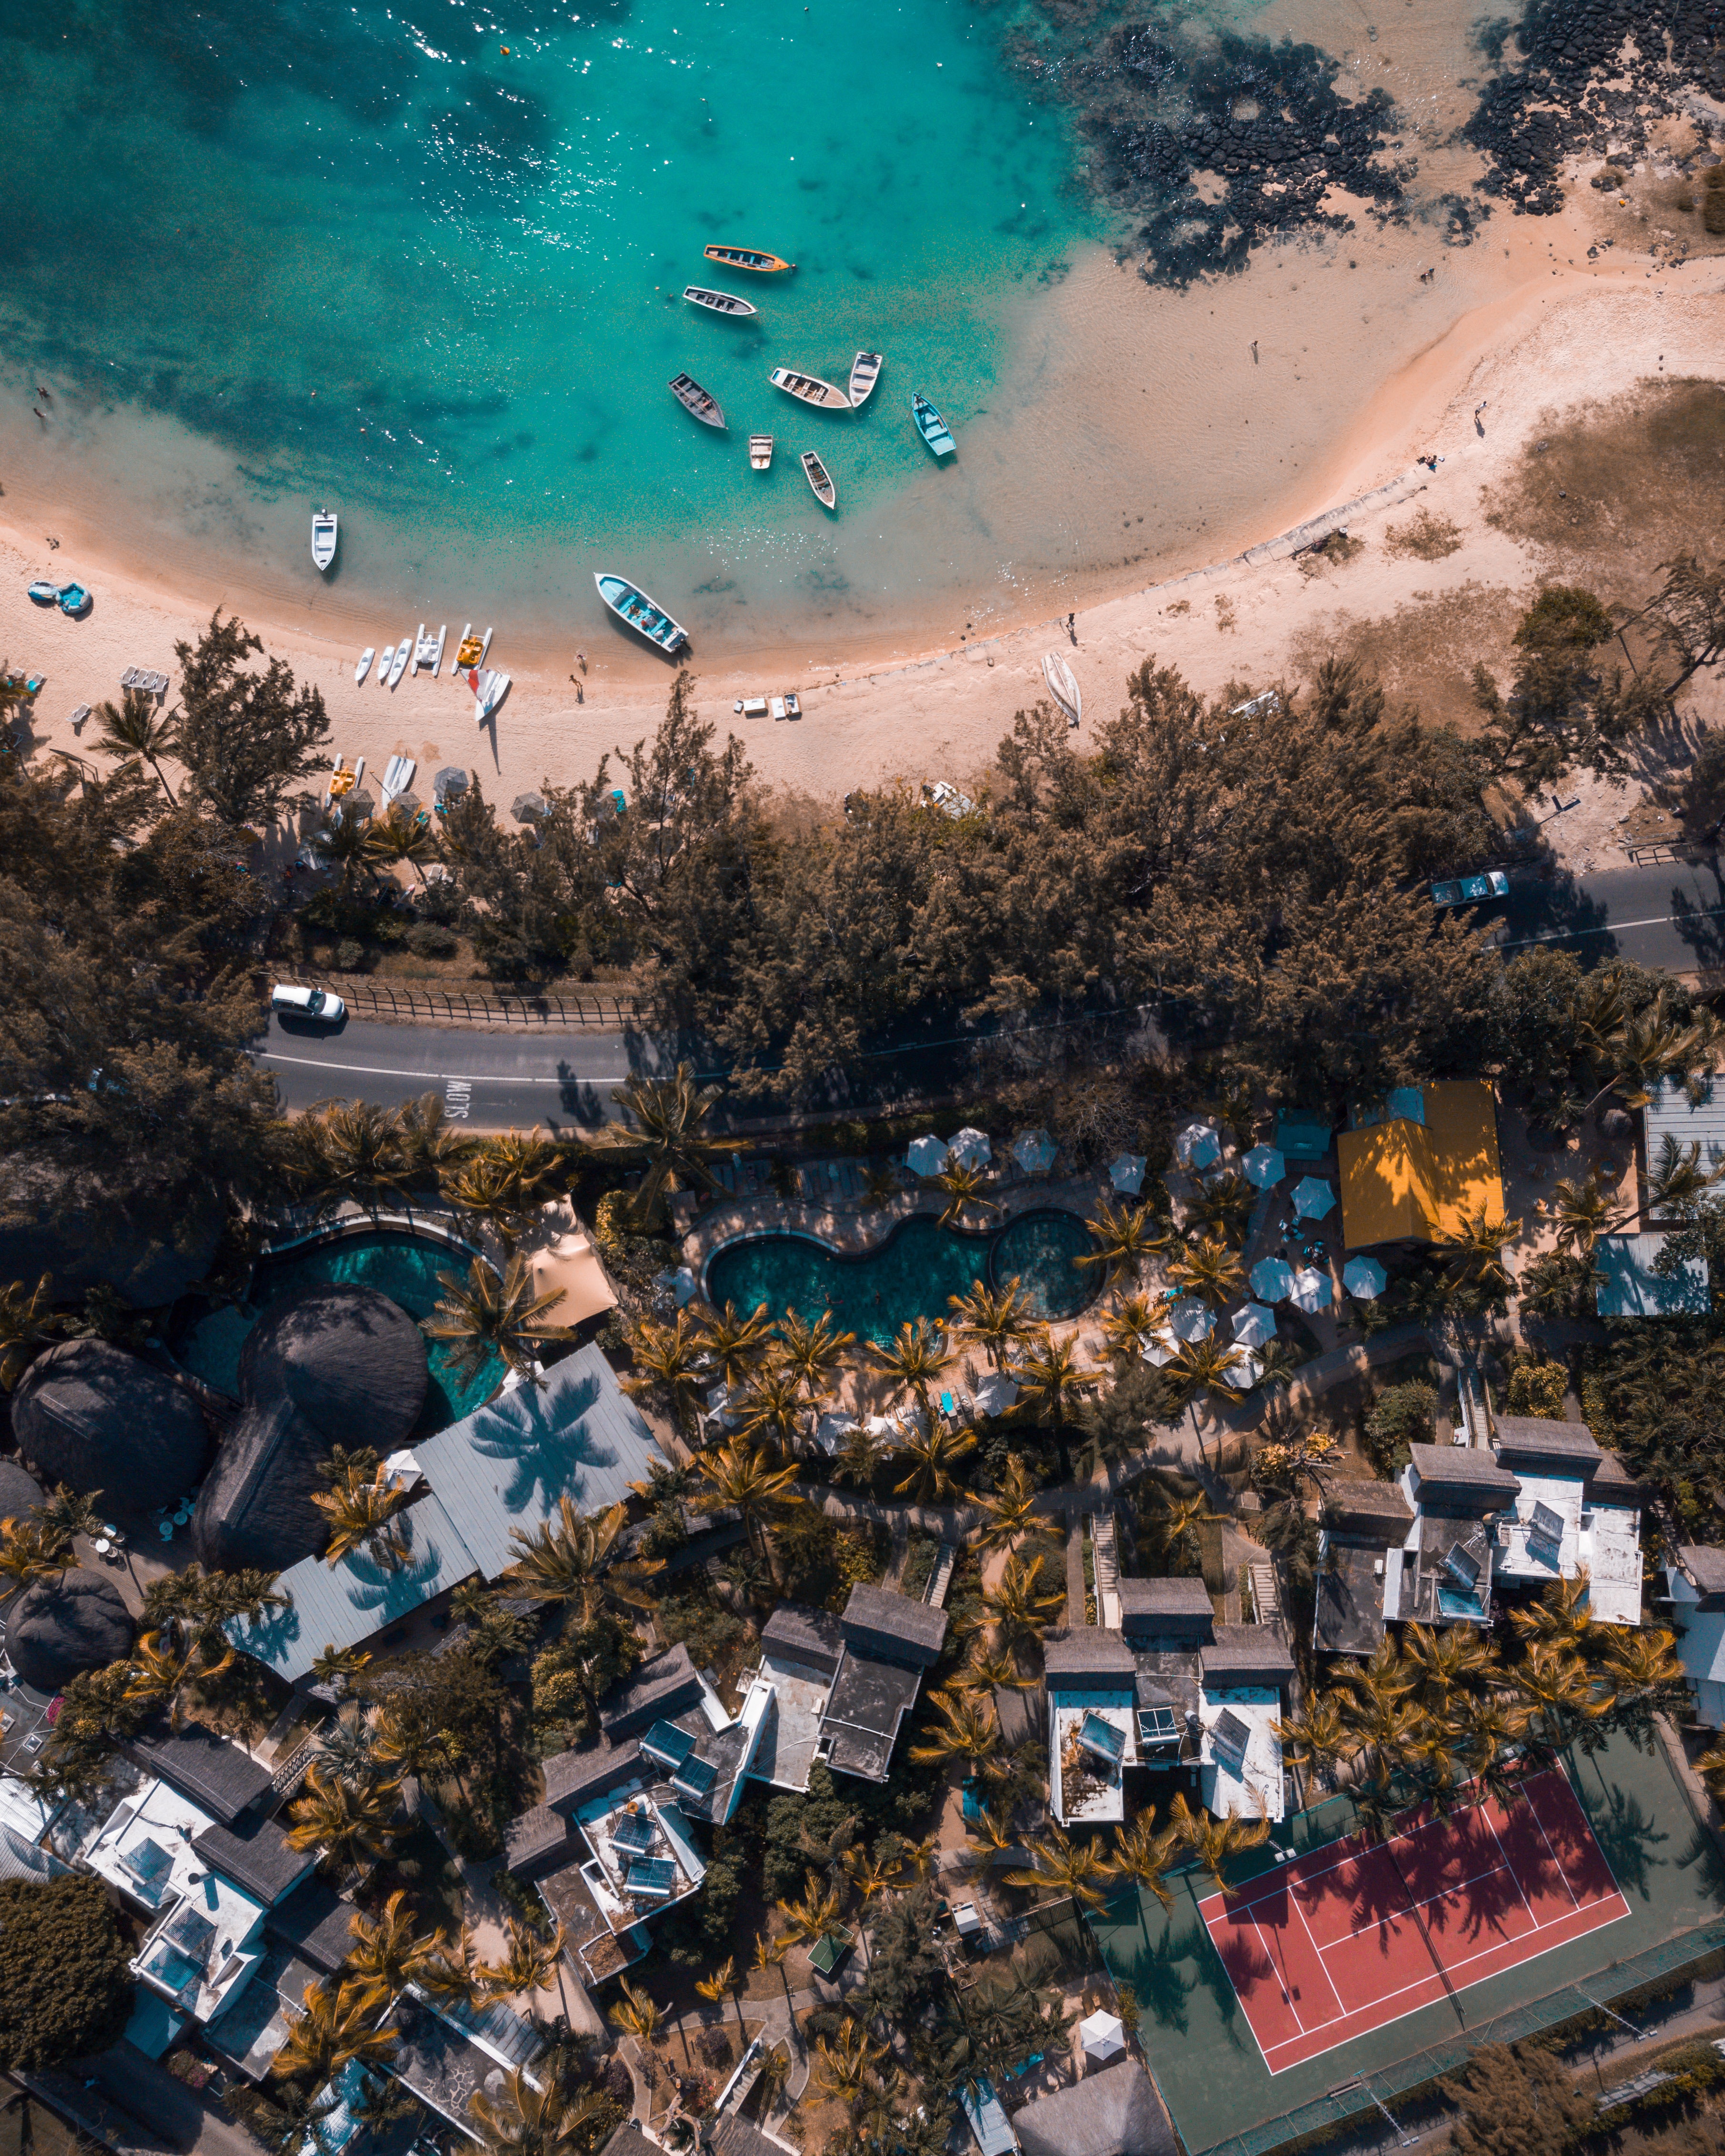 Cool Wallpapers miscellaneous, trees, beach, building, view from above, coast, miscellanea, road